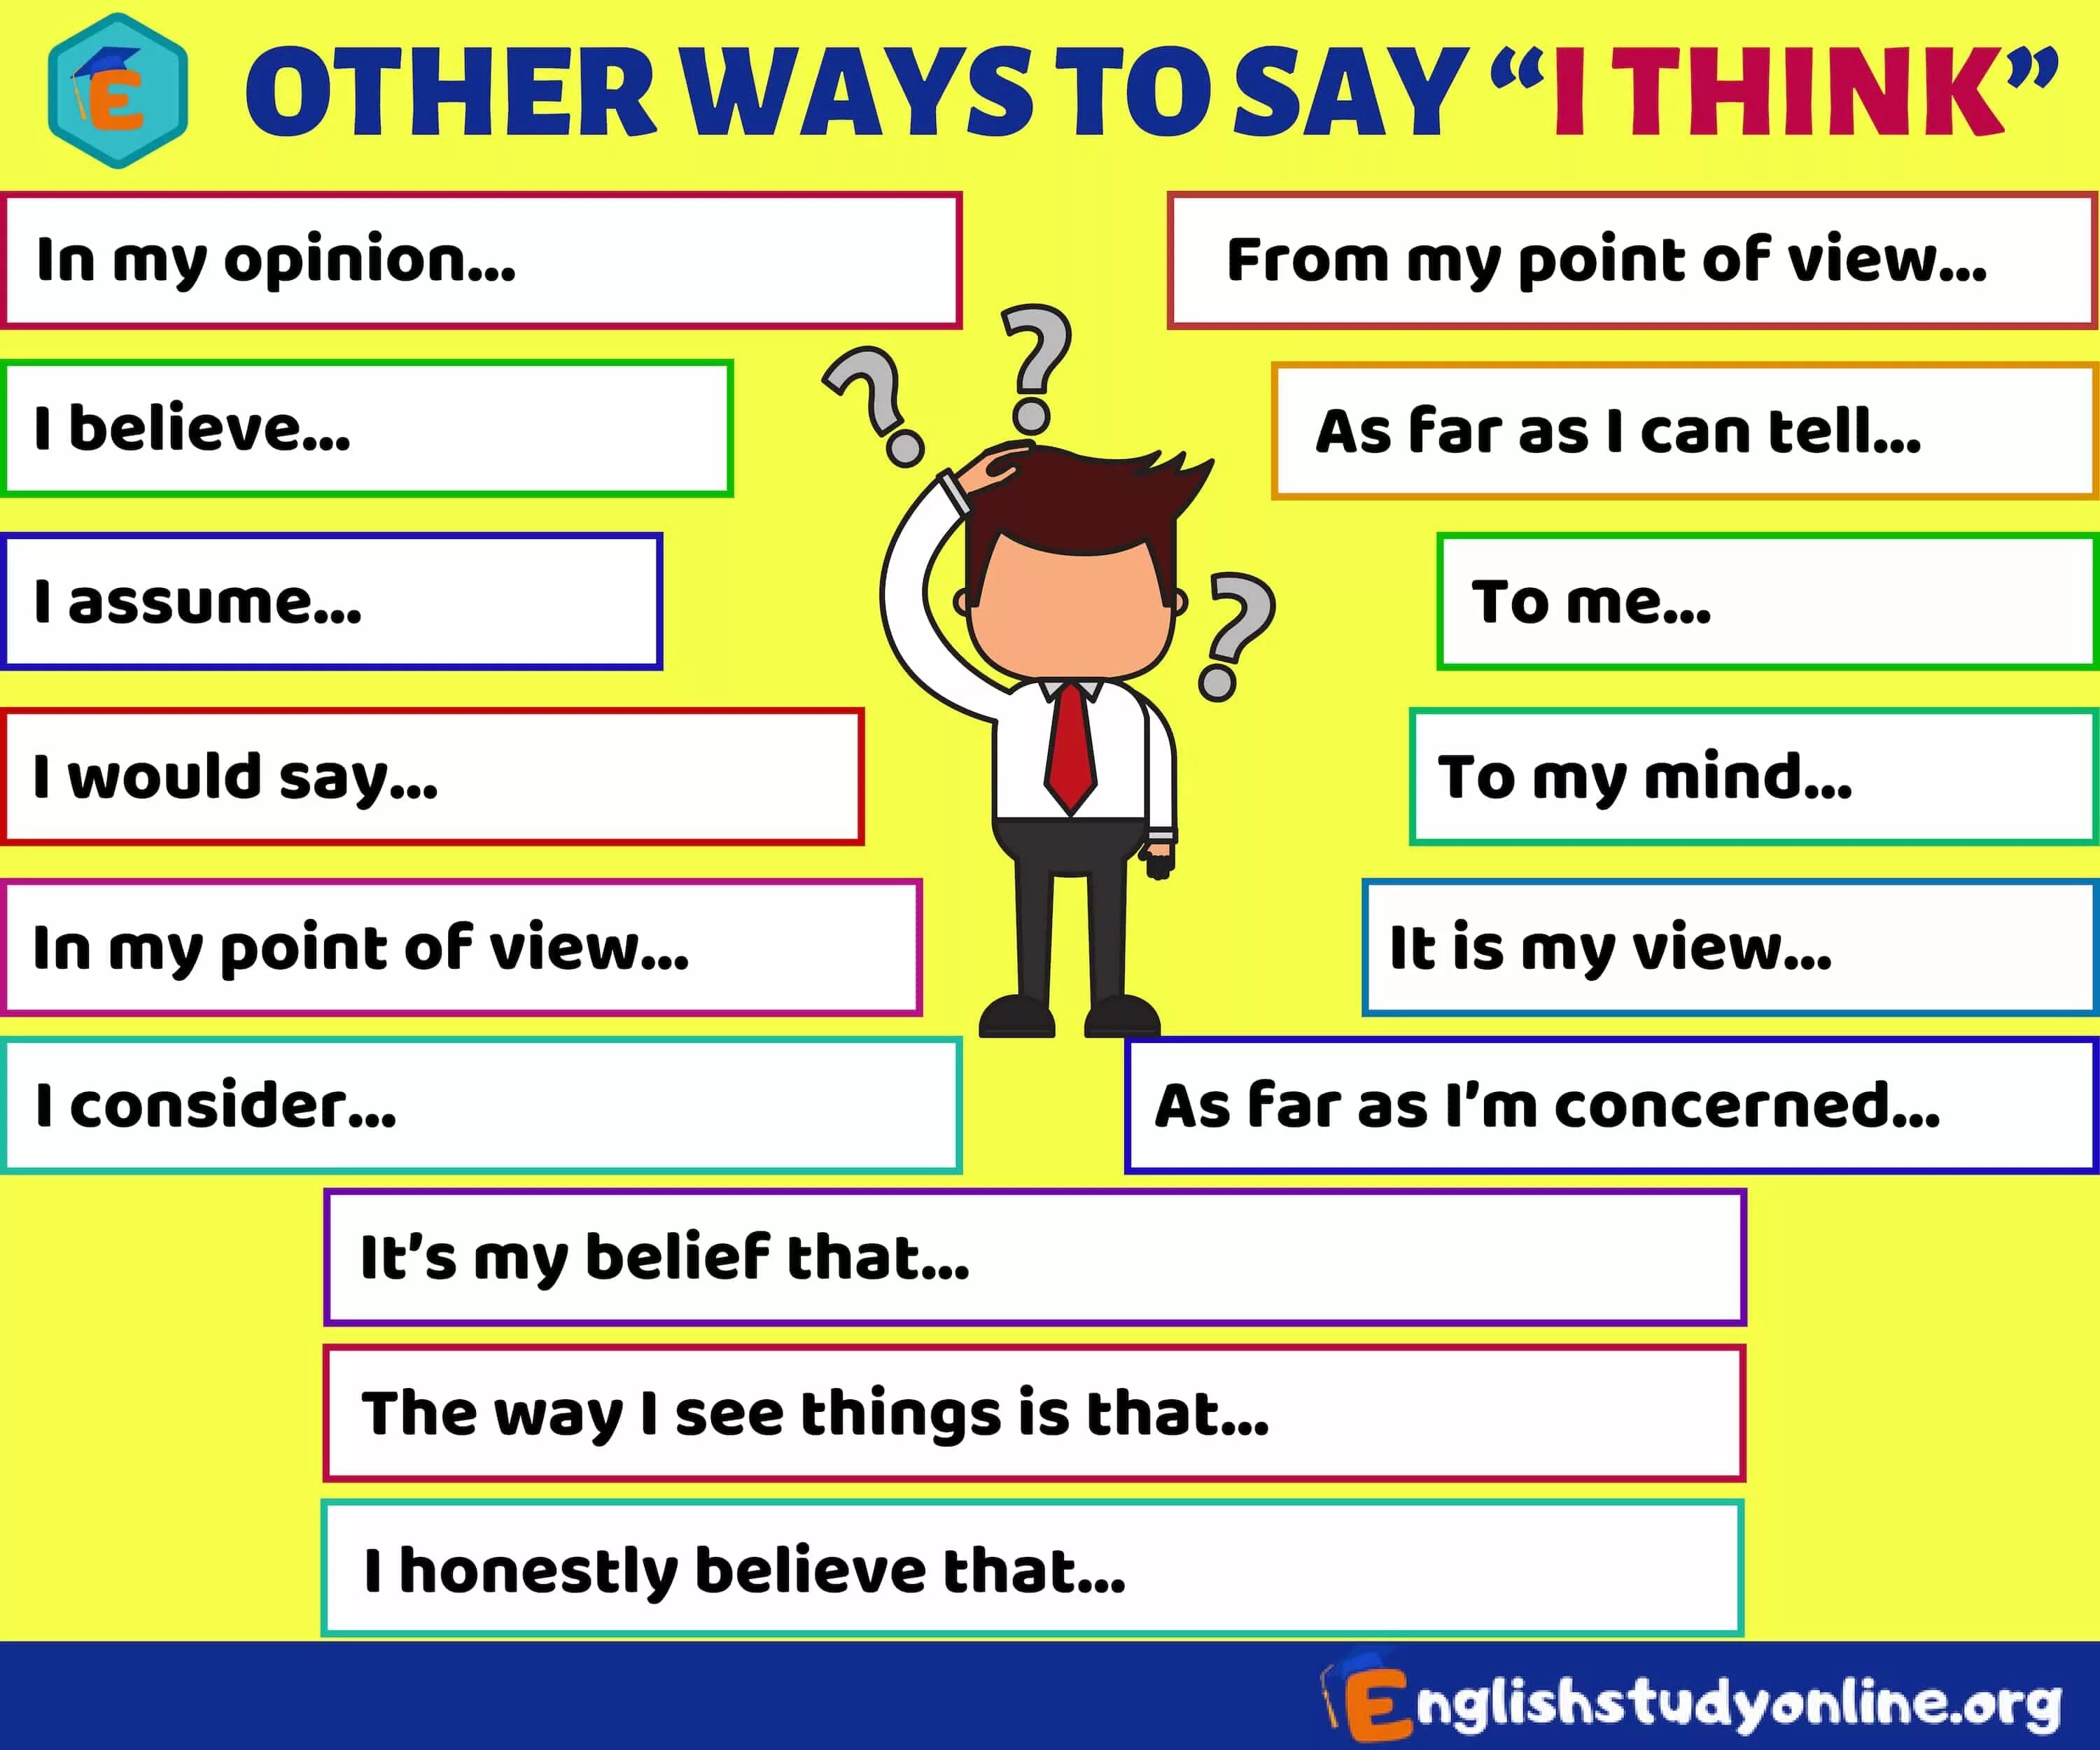 Say like. Английский other way to say. Other ways to say. I think синонимы. Фразы синонимы на английском.